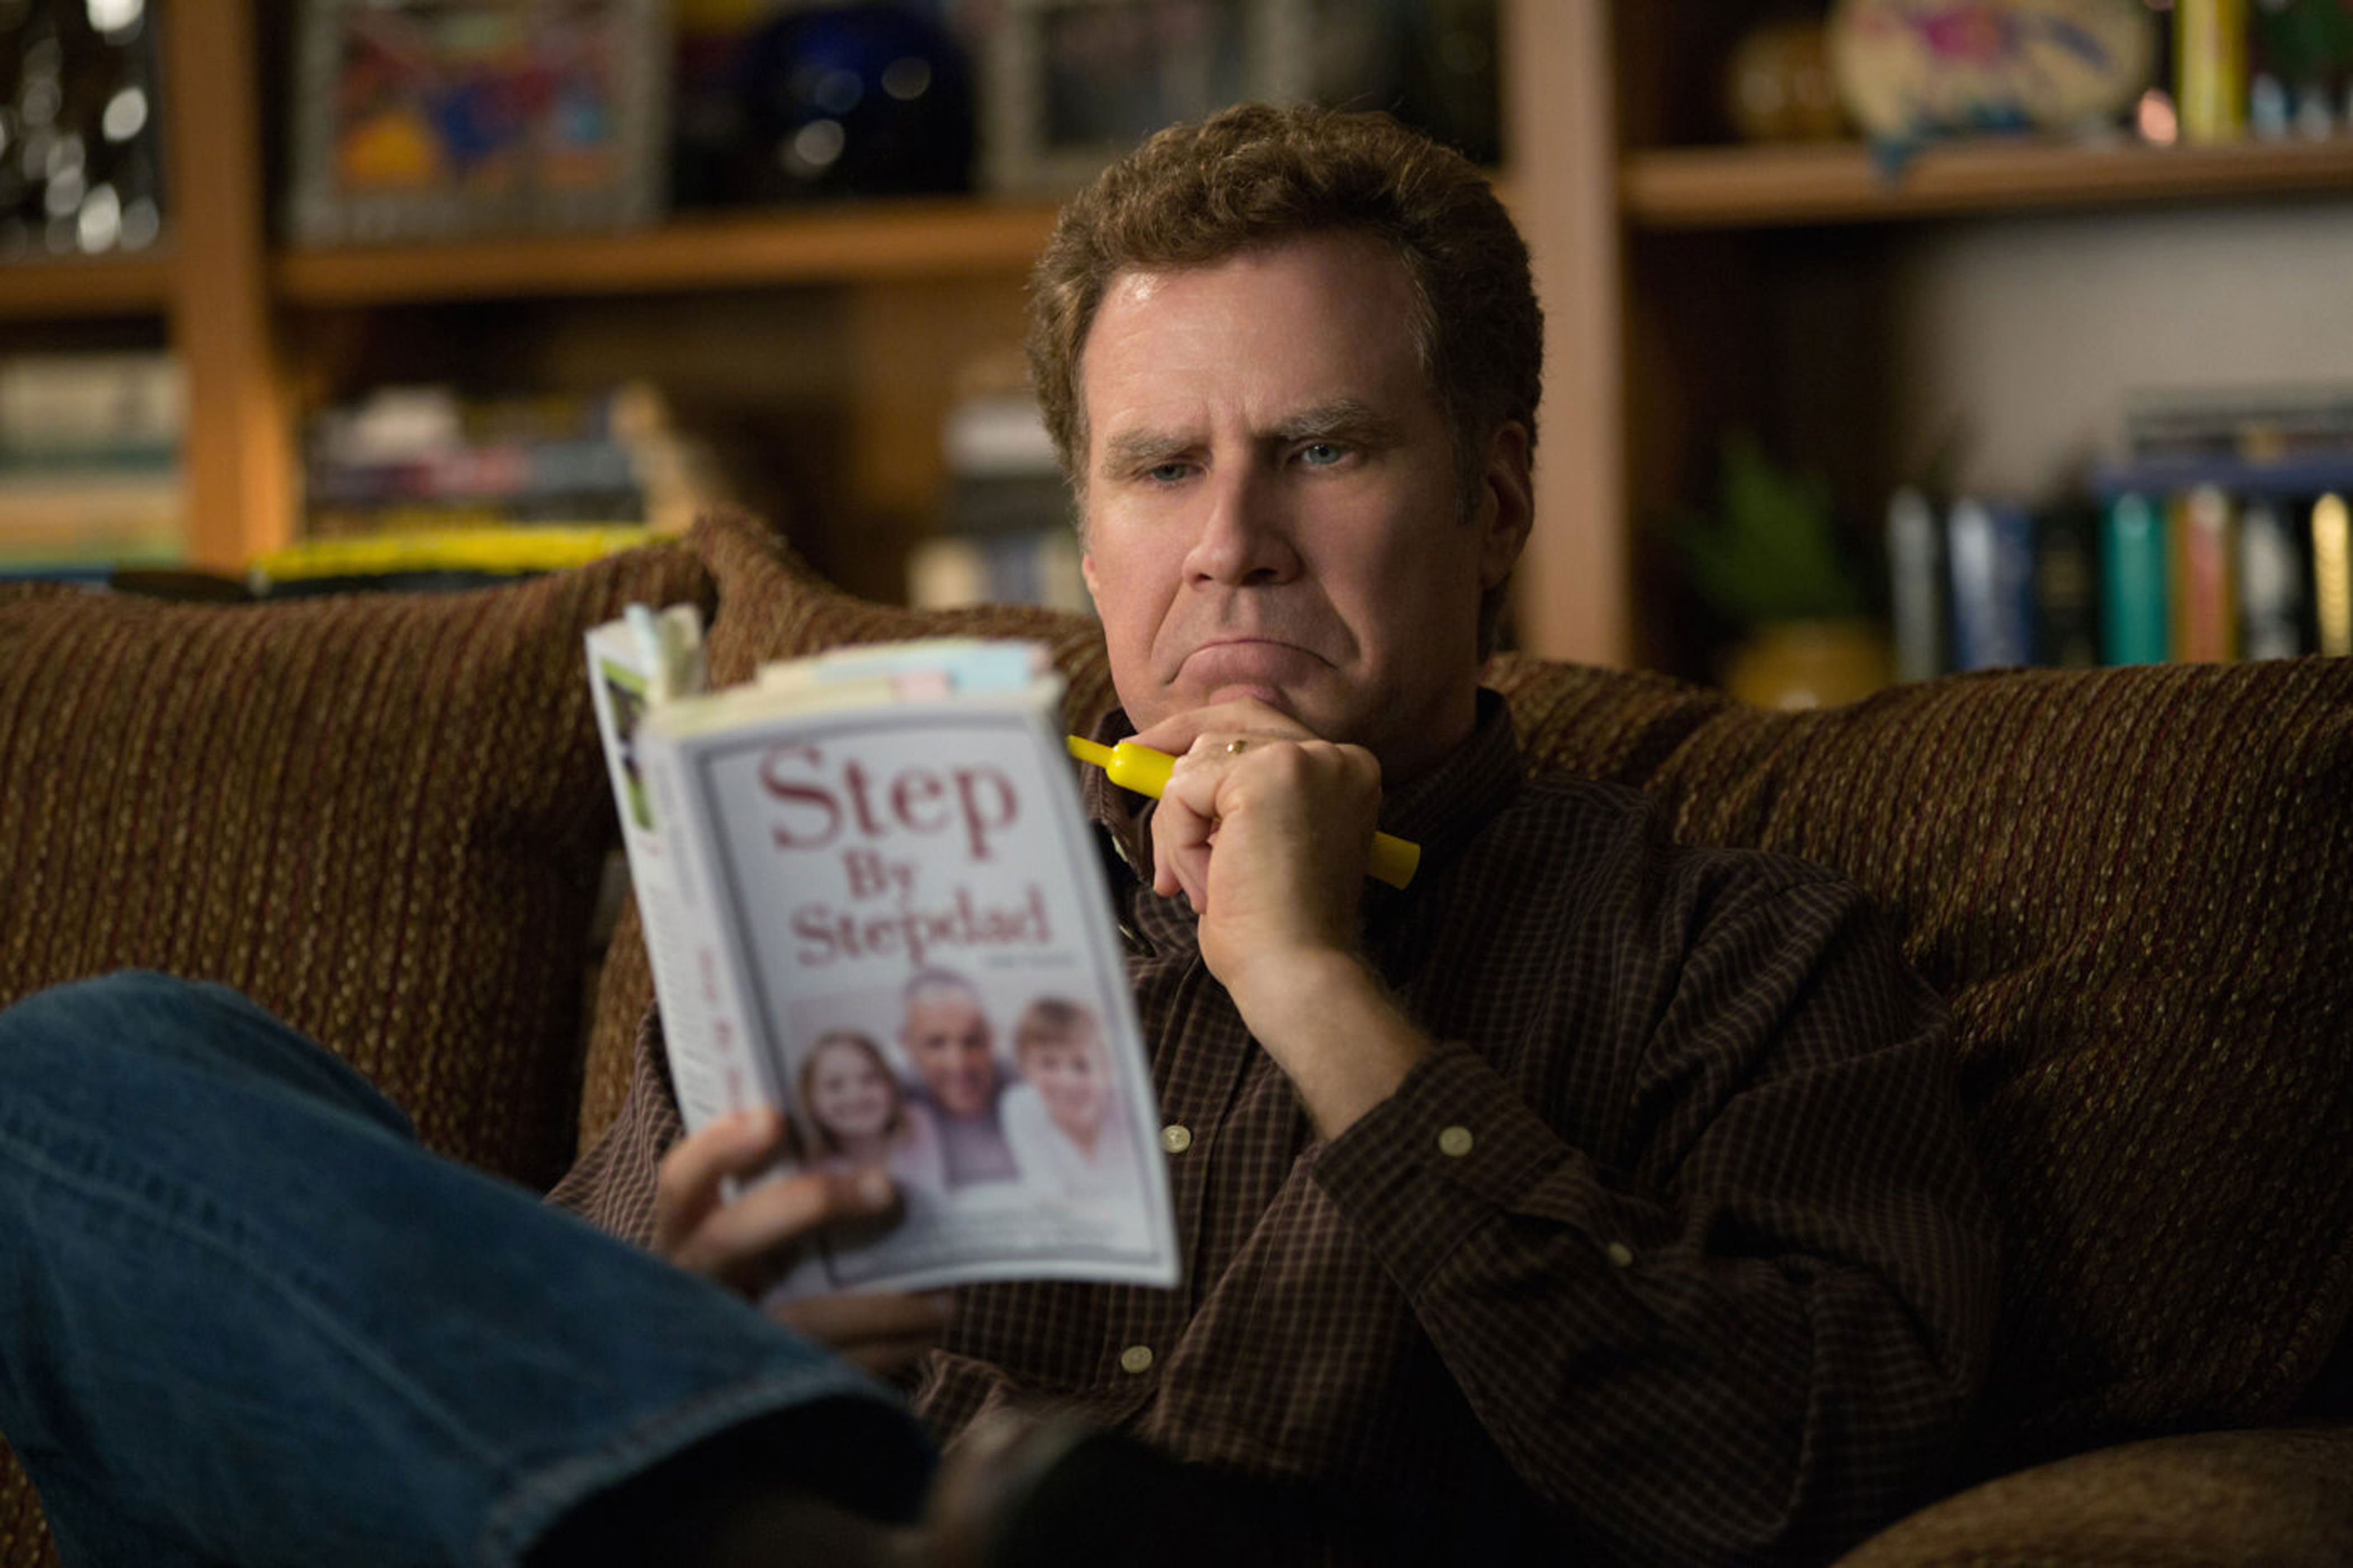 <p>"Daddy's Home" was almost as unfunny as its sequel. Will Ferrell starred as a boring, gentle stepfather who faces off against his wife's ex, a sexy manly man played by Mark Wahlberg, in the 2015 flick that was, surprisingly, his highest grossing live-action film ever at the time. The movie lacked imagination, though it did provide a few laughs here and there.</p>